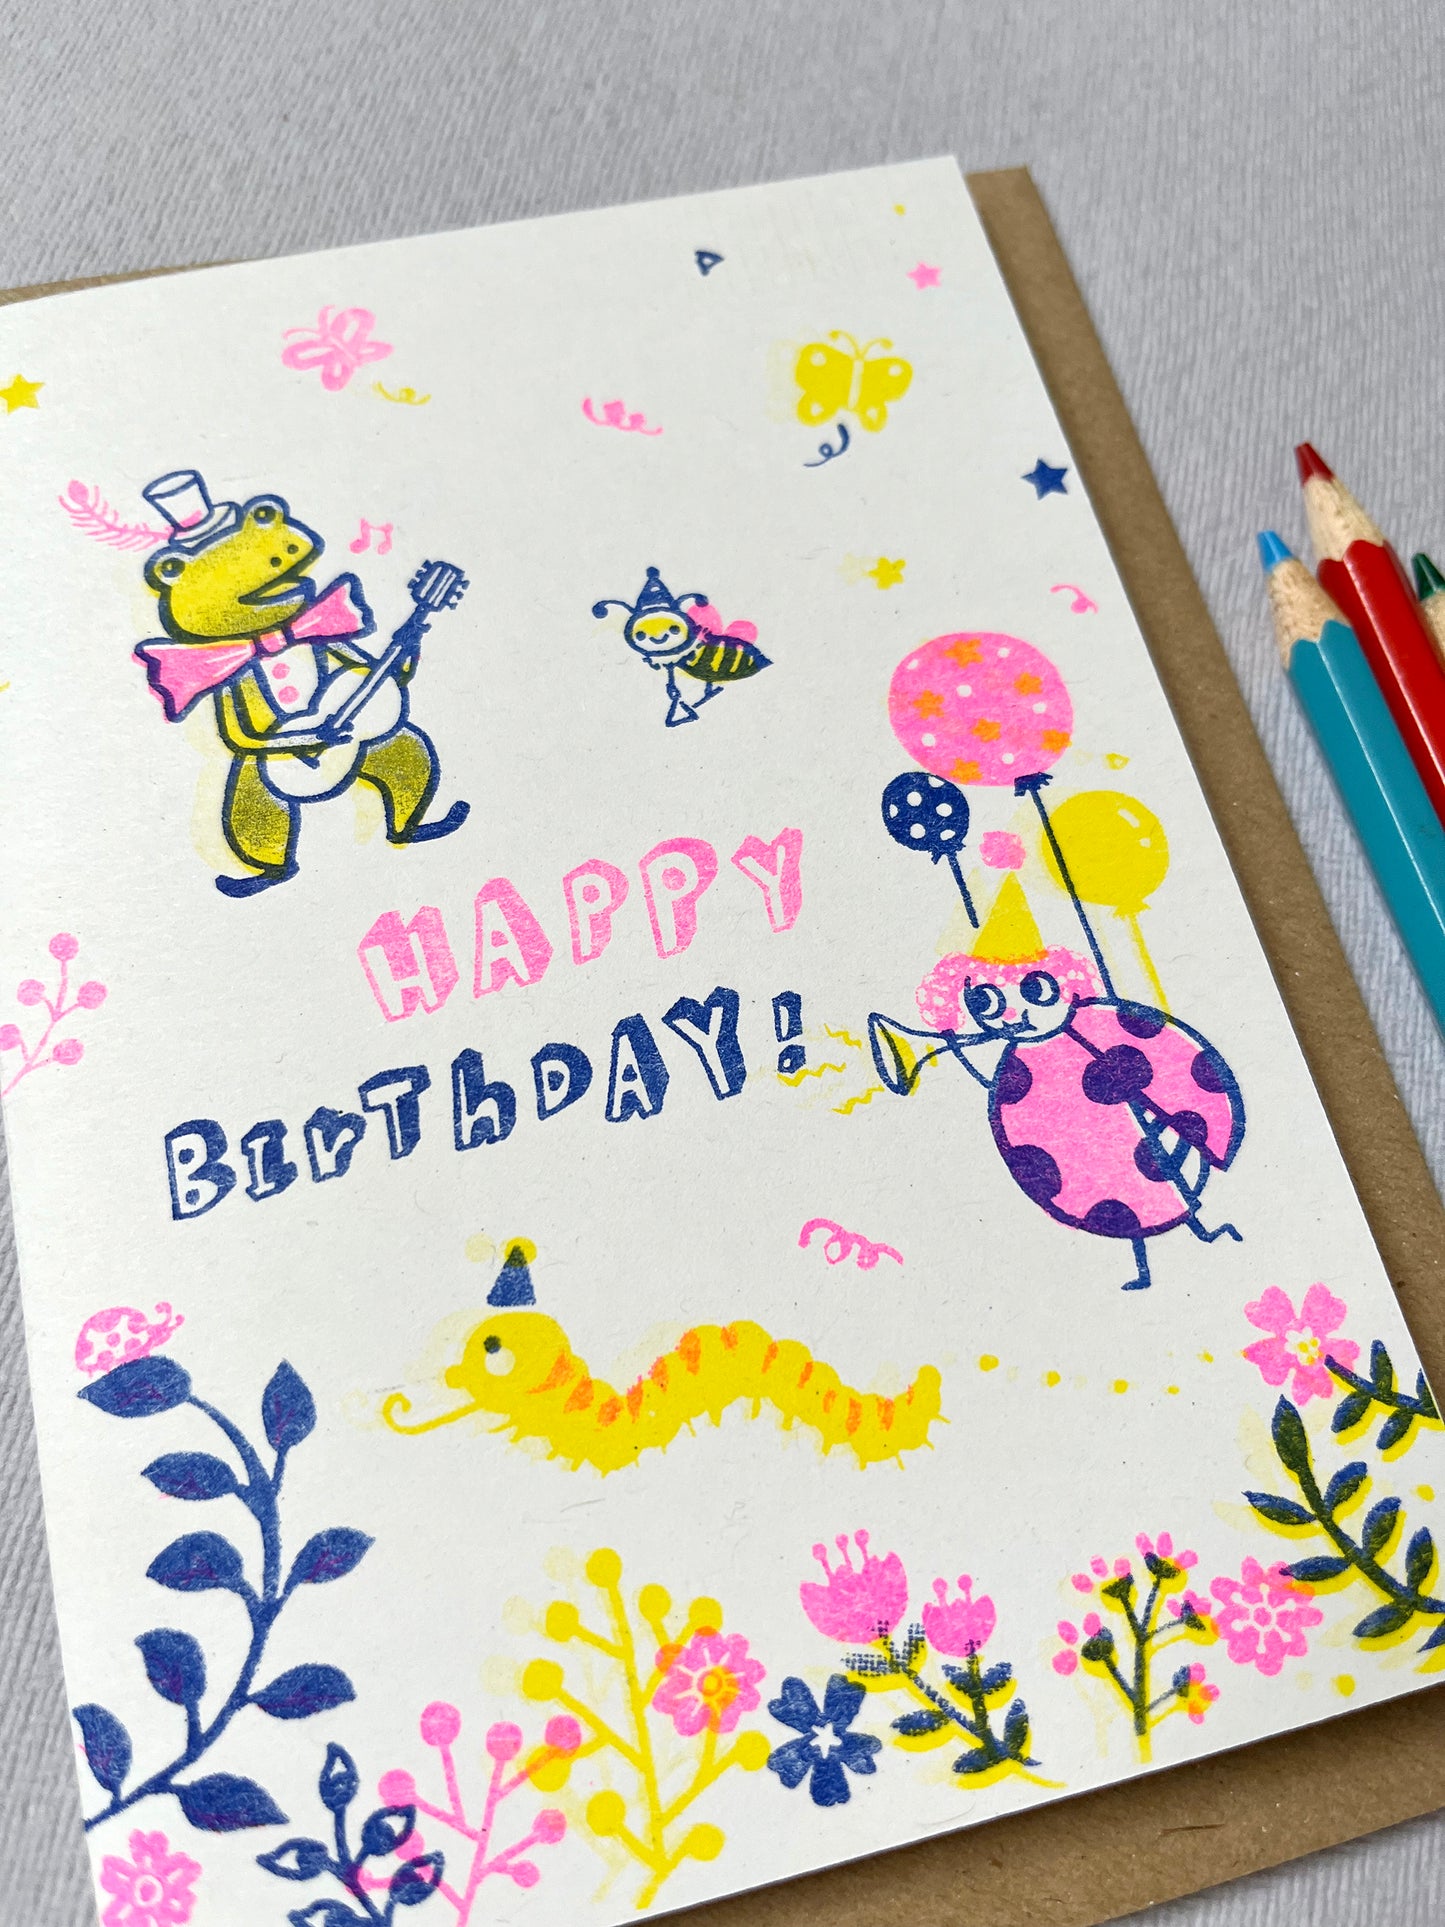 Birthday bugs party - A6 risograph greeting Card - congratulations birthday card